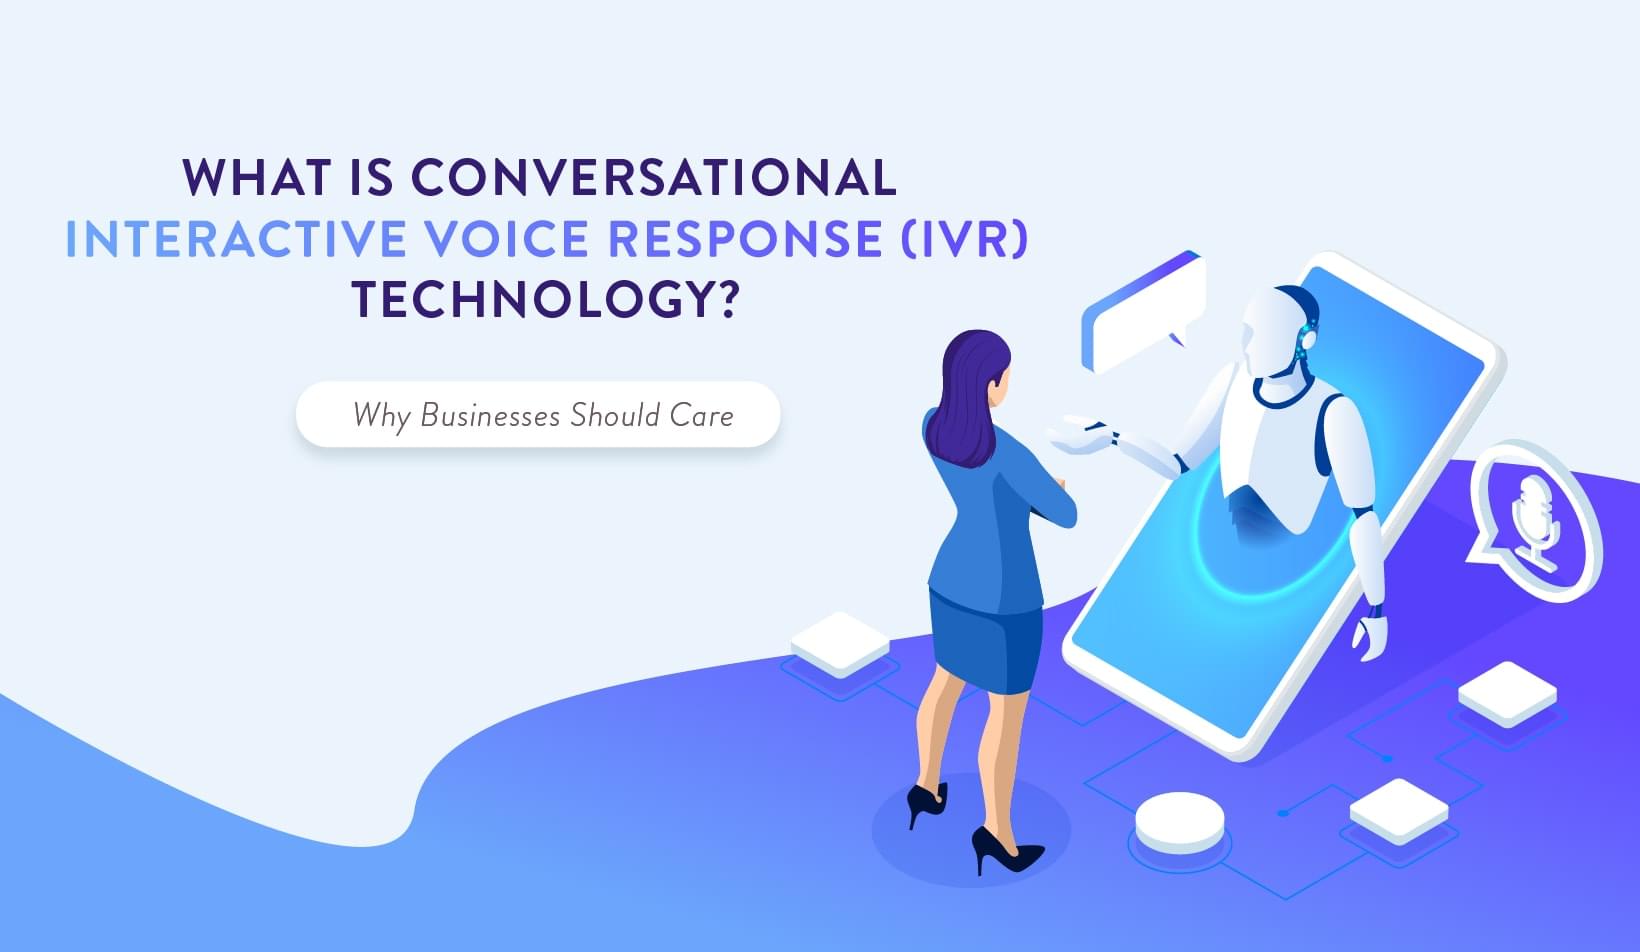 What is Conversational IVR and Why Businesses Should Care